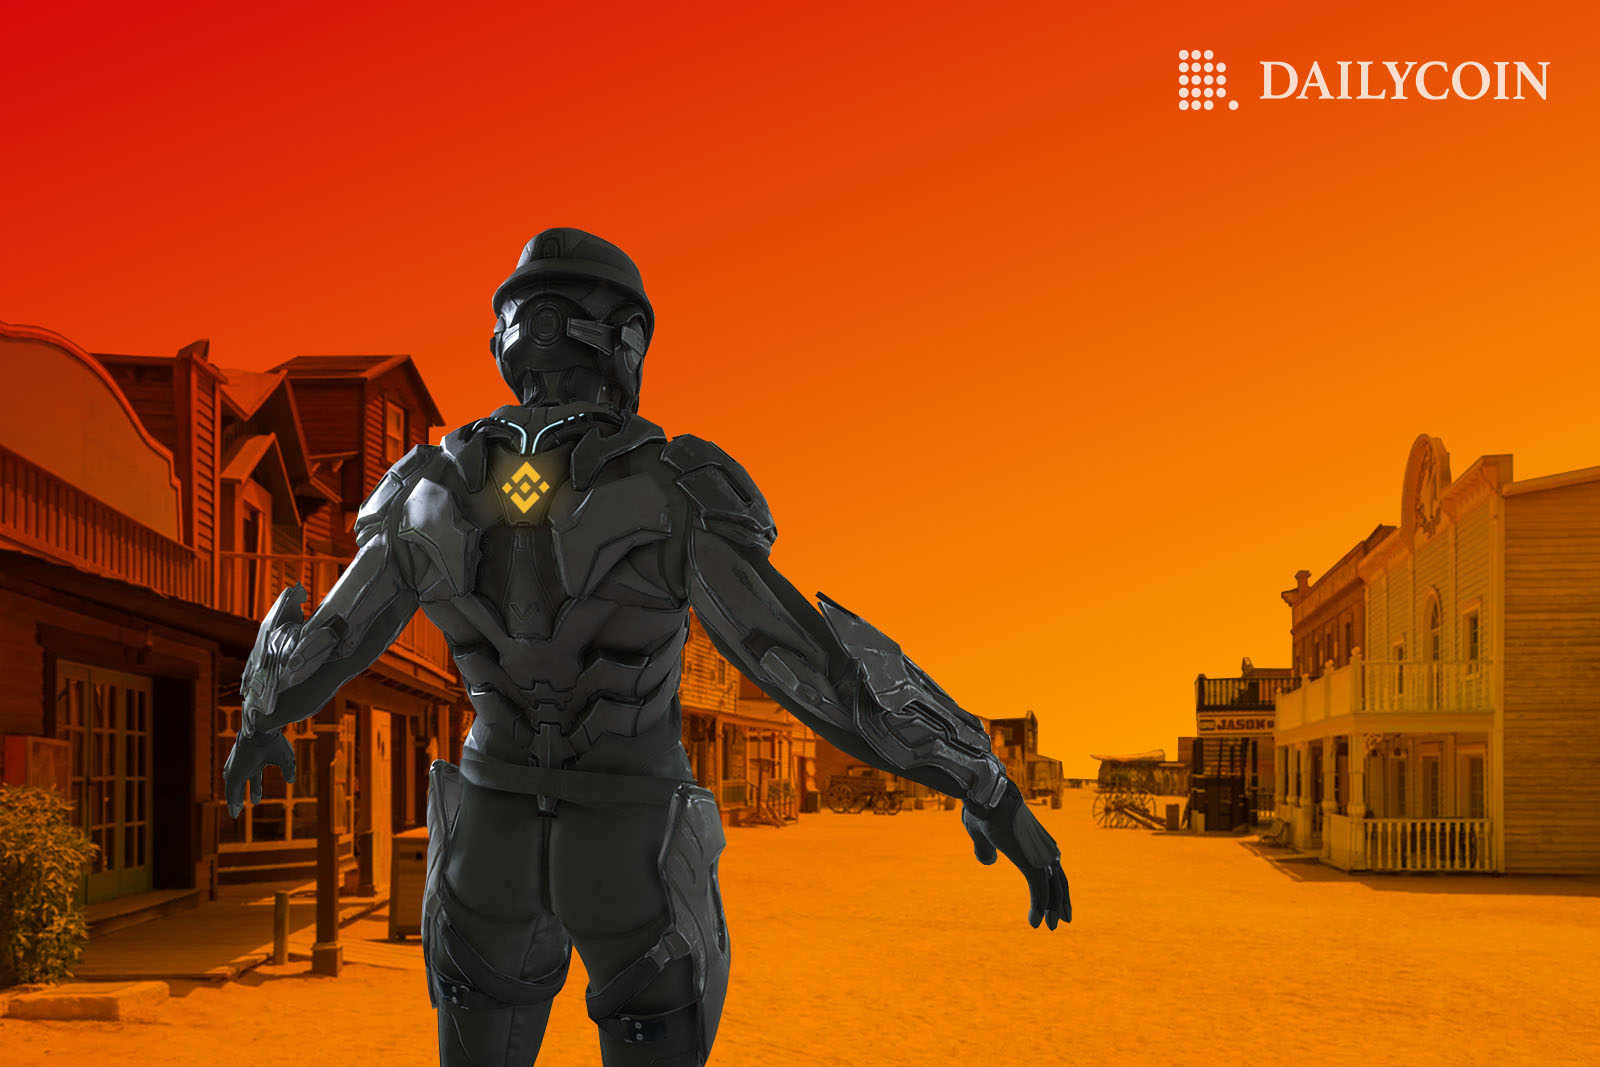 A military robot with a Binance logo on it steps into a Wild West town